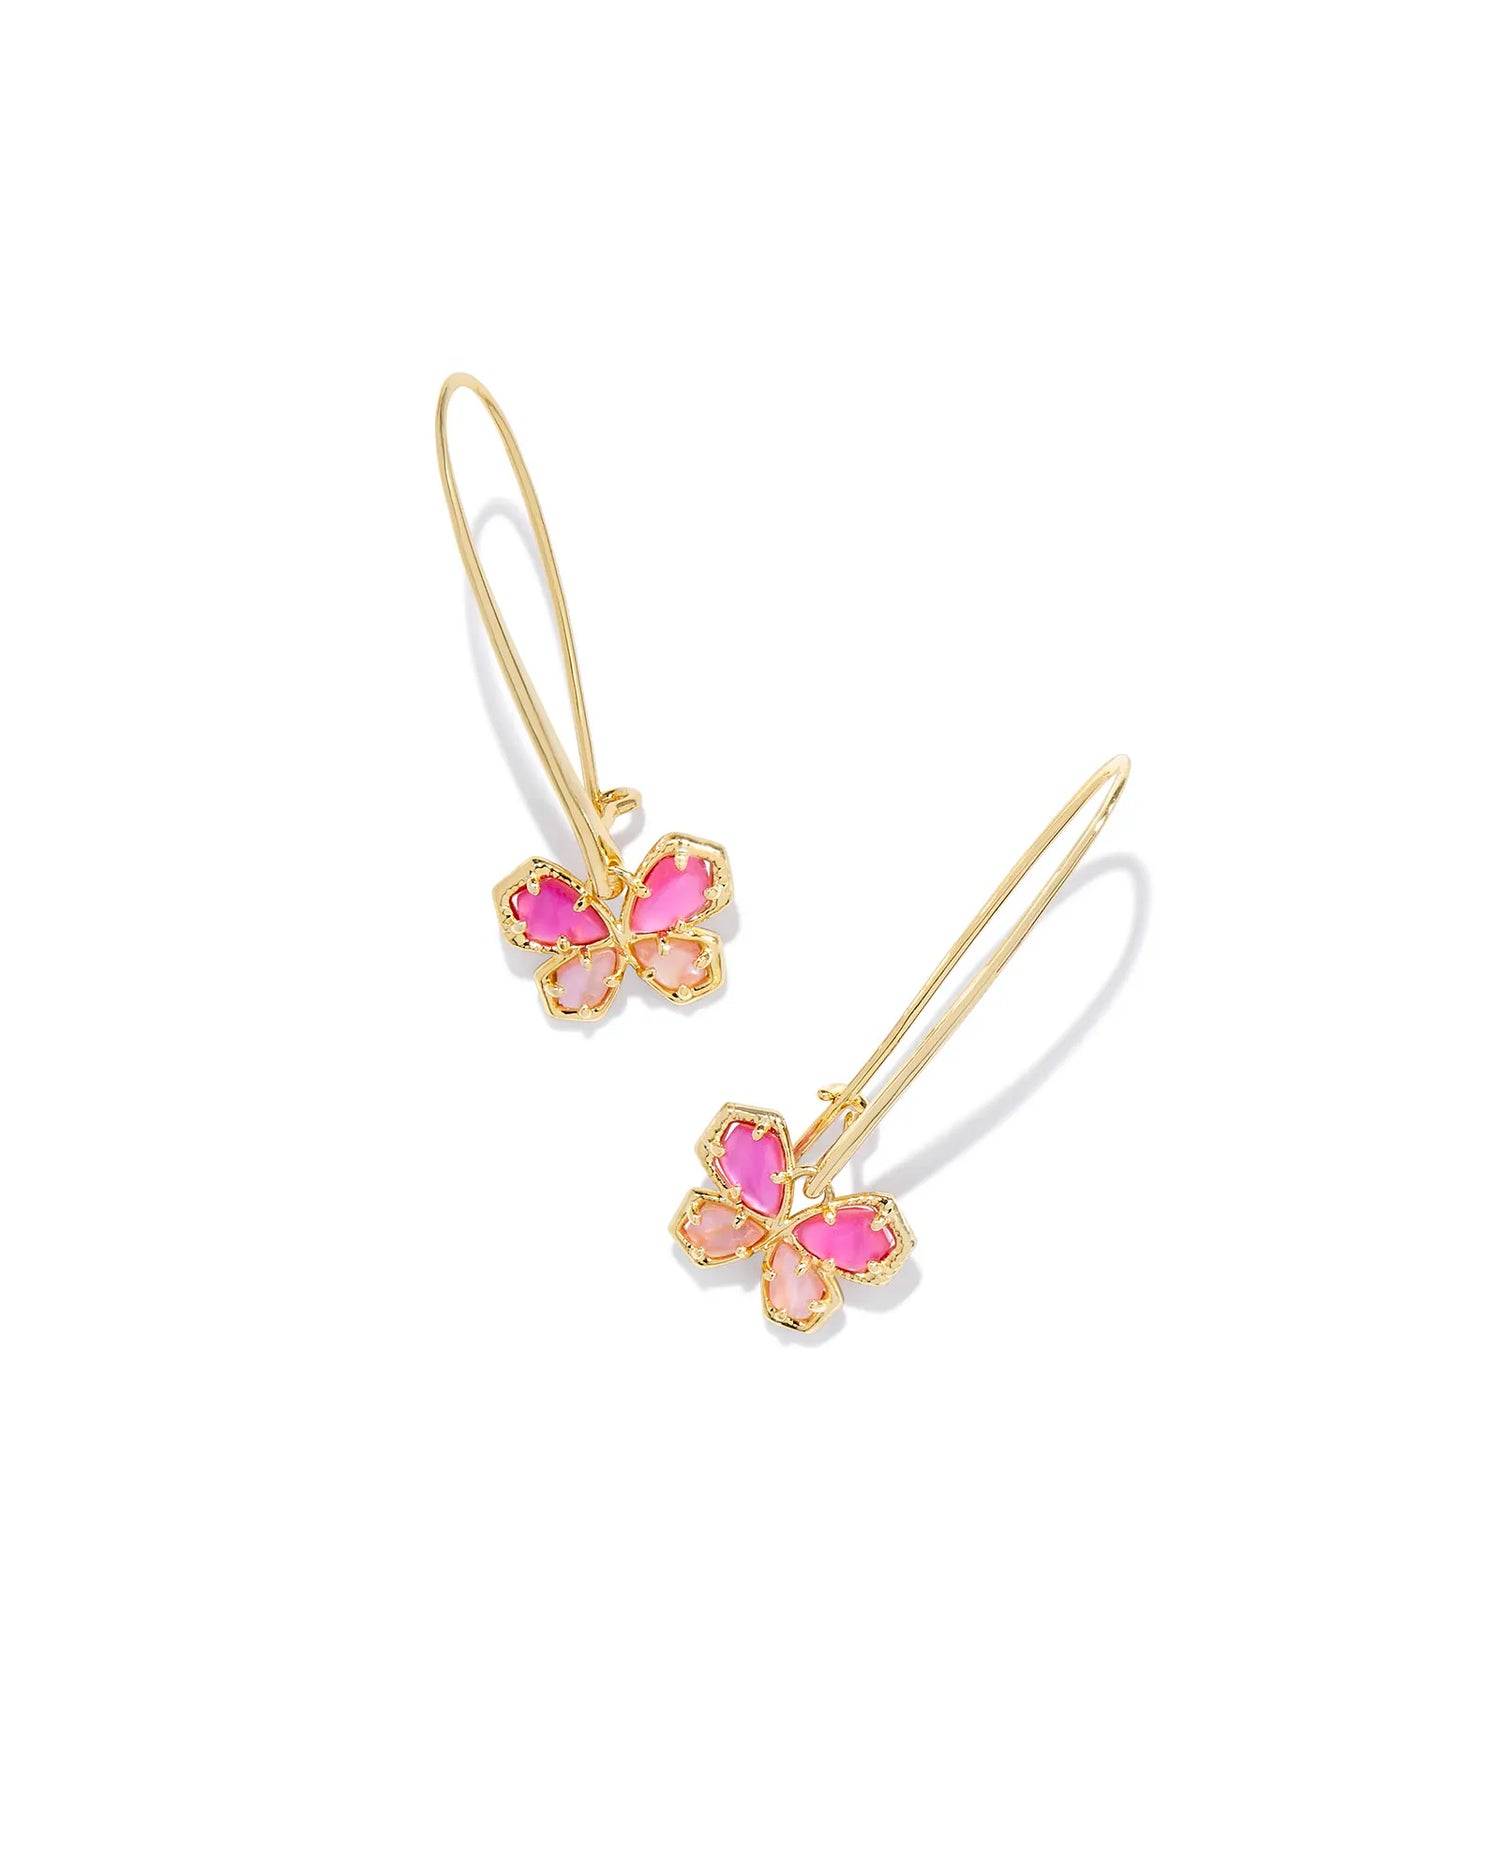 gold wire drop earrings with a butterfly charm in a pink mix color